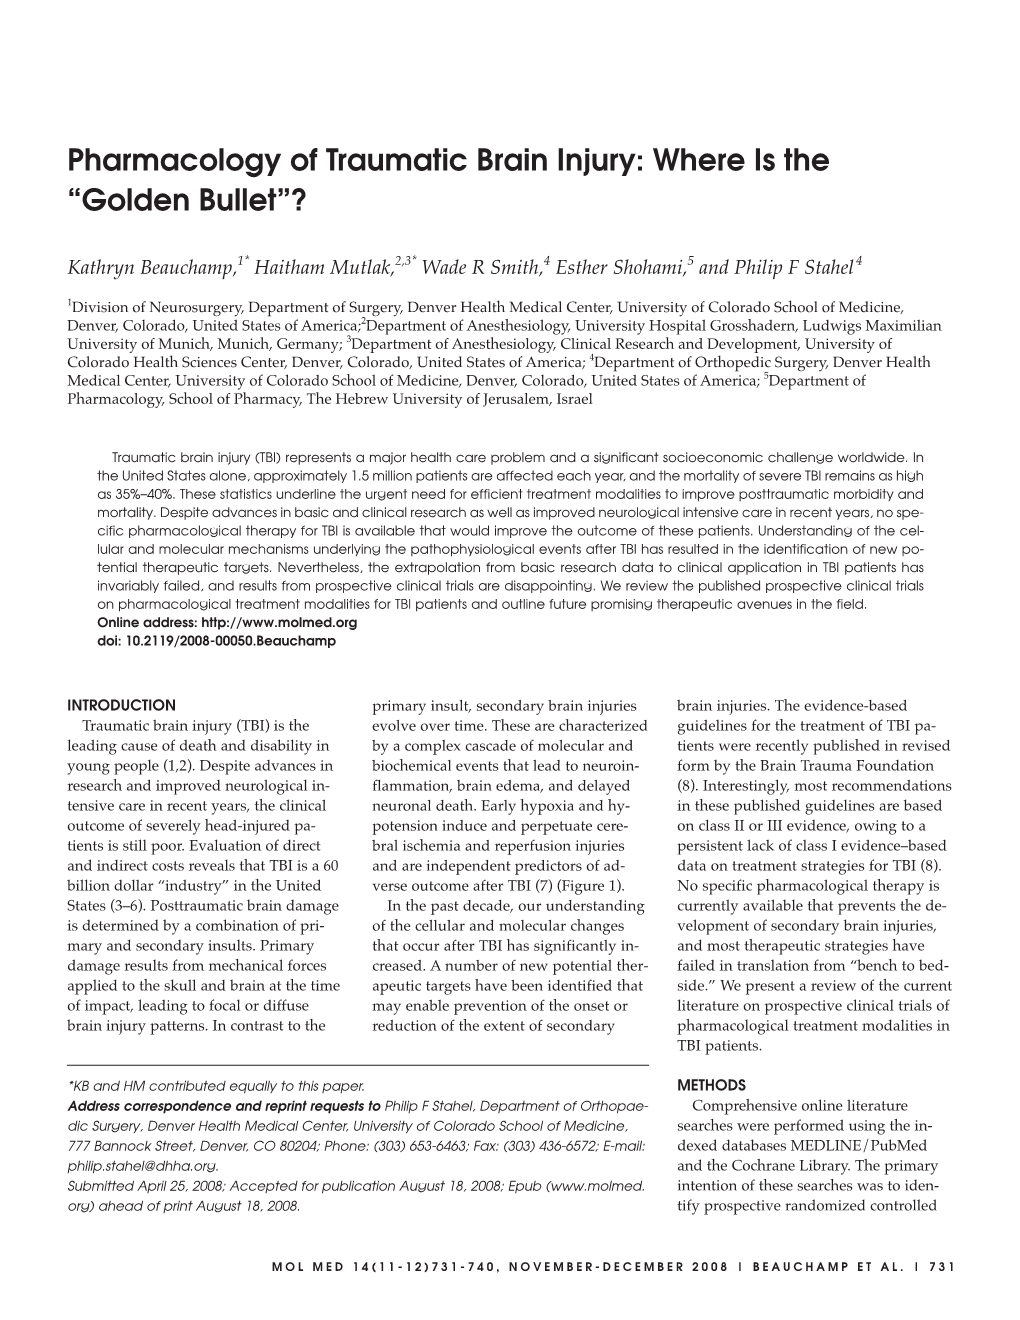 Pharmacology of Traumatic Brain Injury: Where Is the “Golden Bullet”?